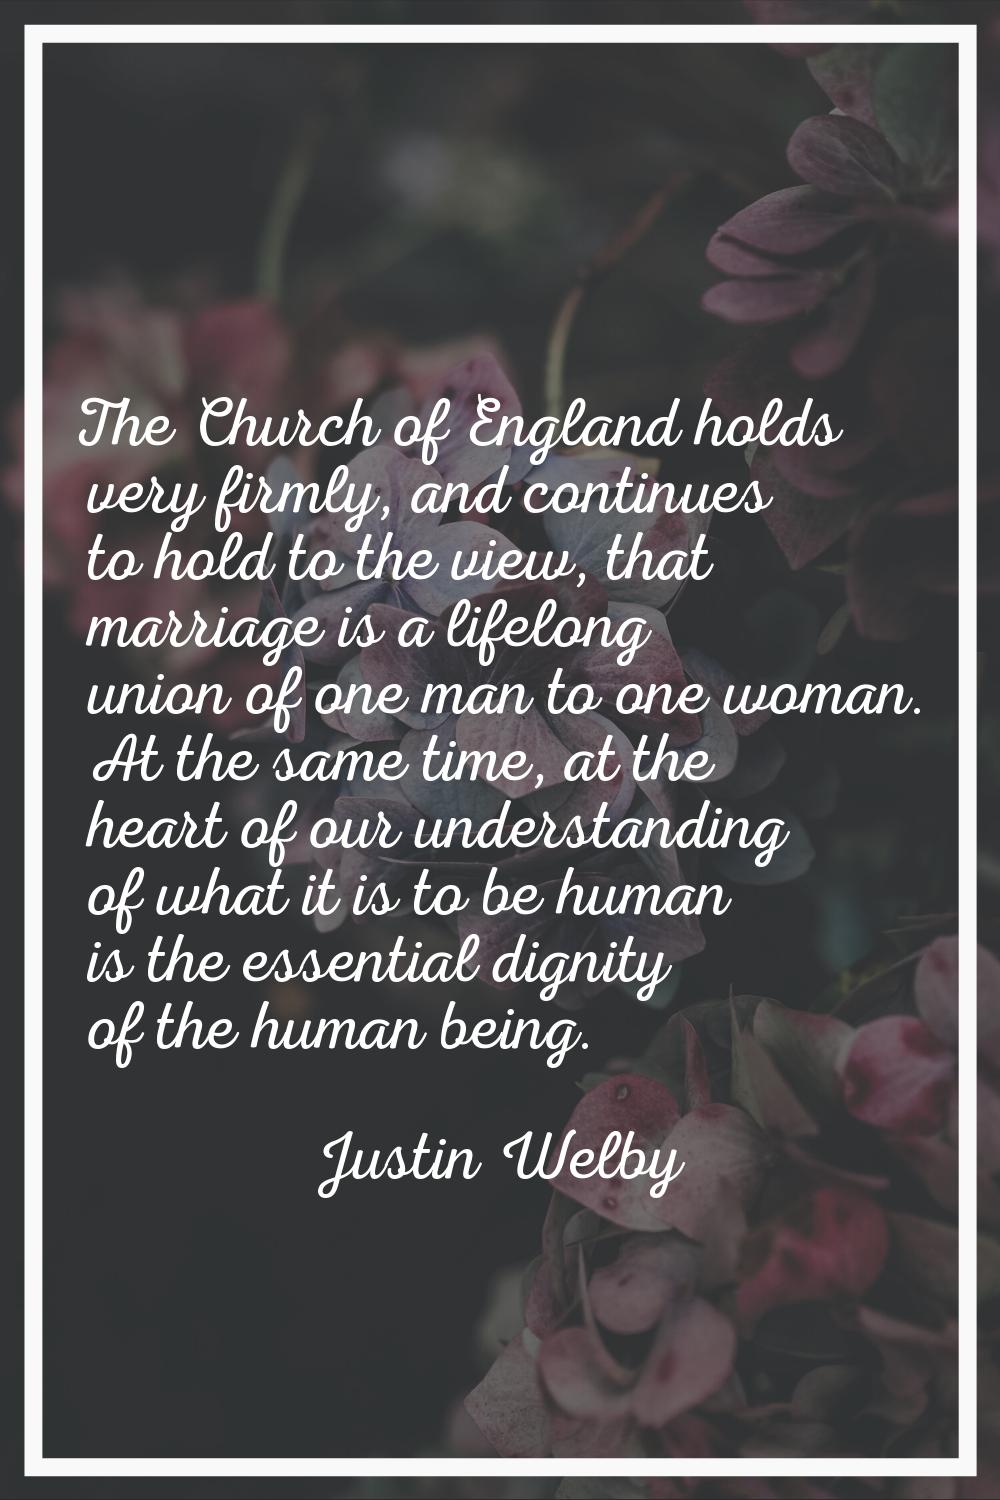 The Church of England holds very firmly, and continues to hold to the view, that marriage is a life